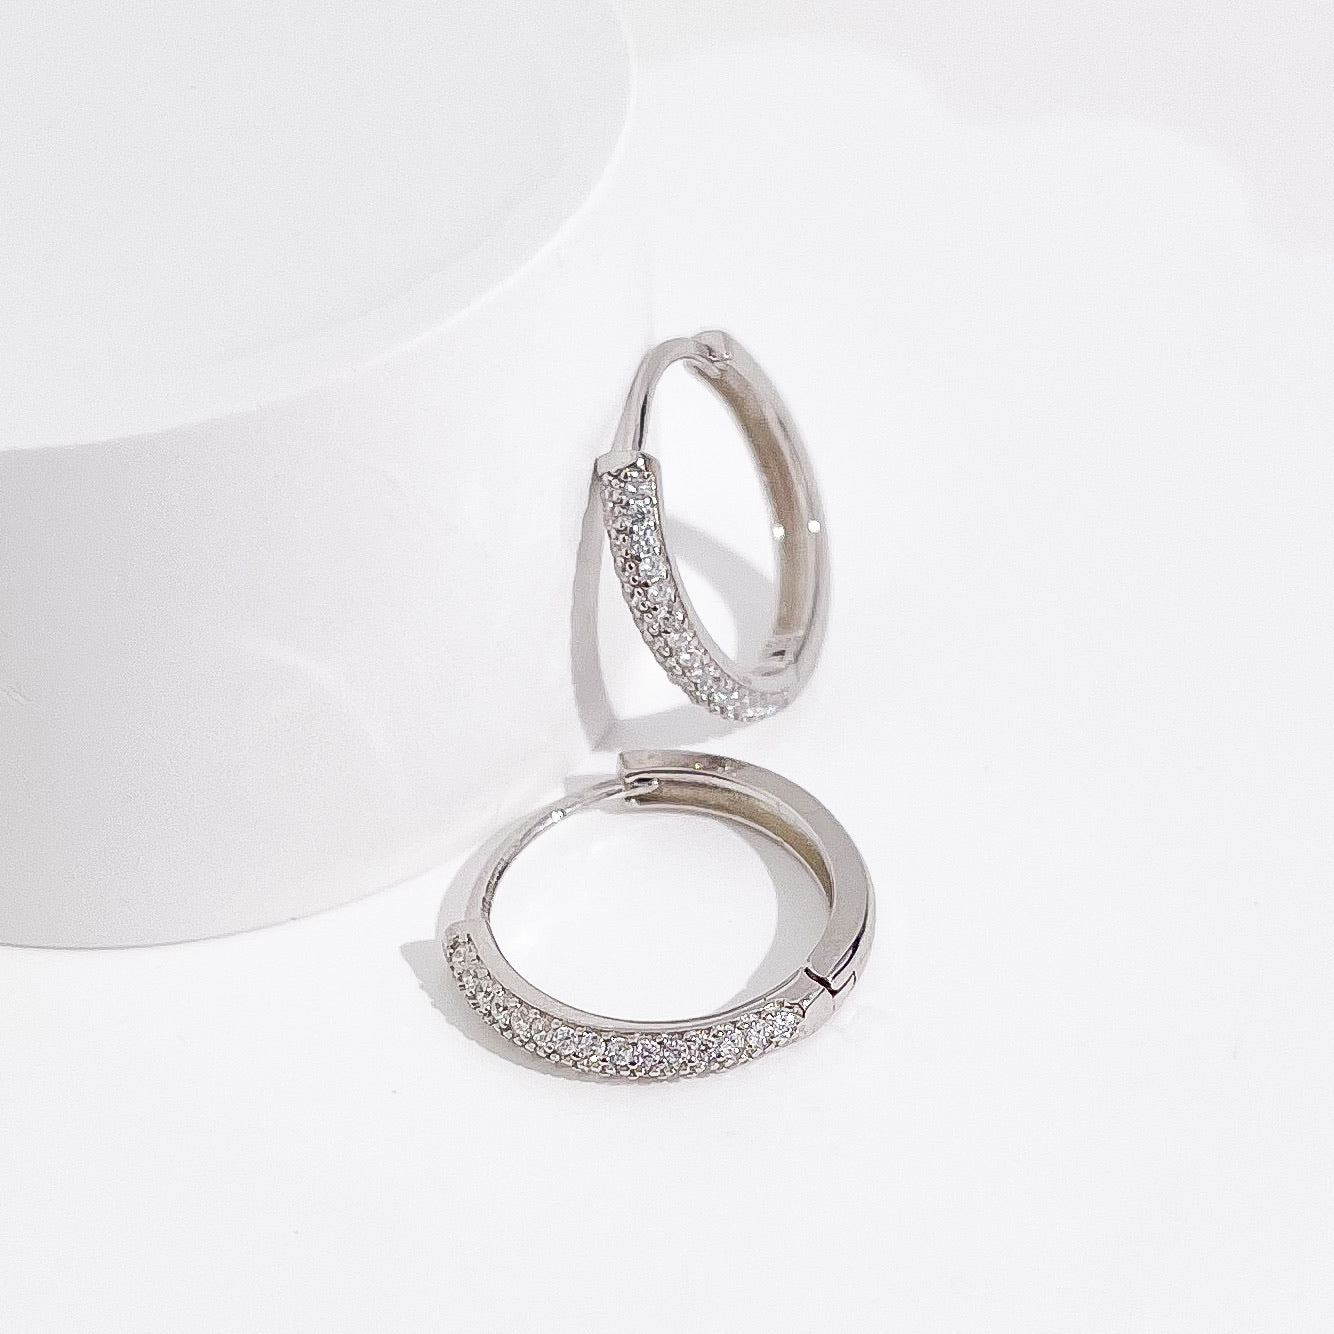 Adele Hoops in Silver - Flaire & Co.